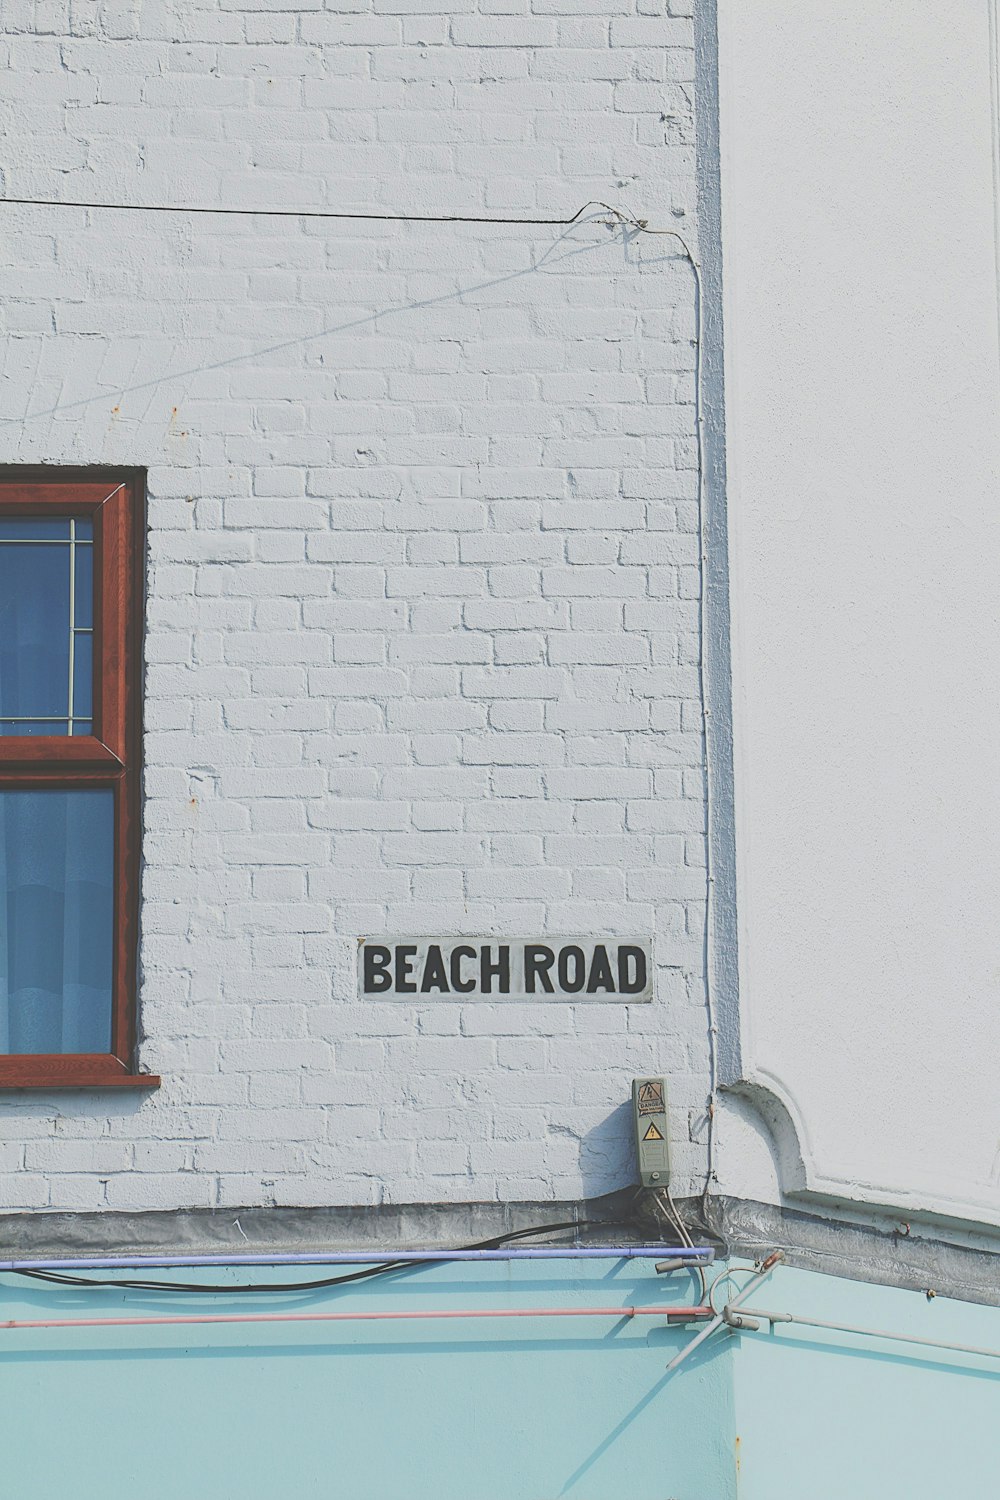 Beach Road signage at daytime